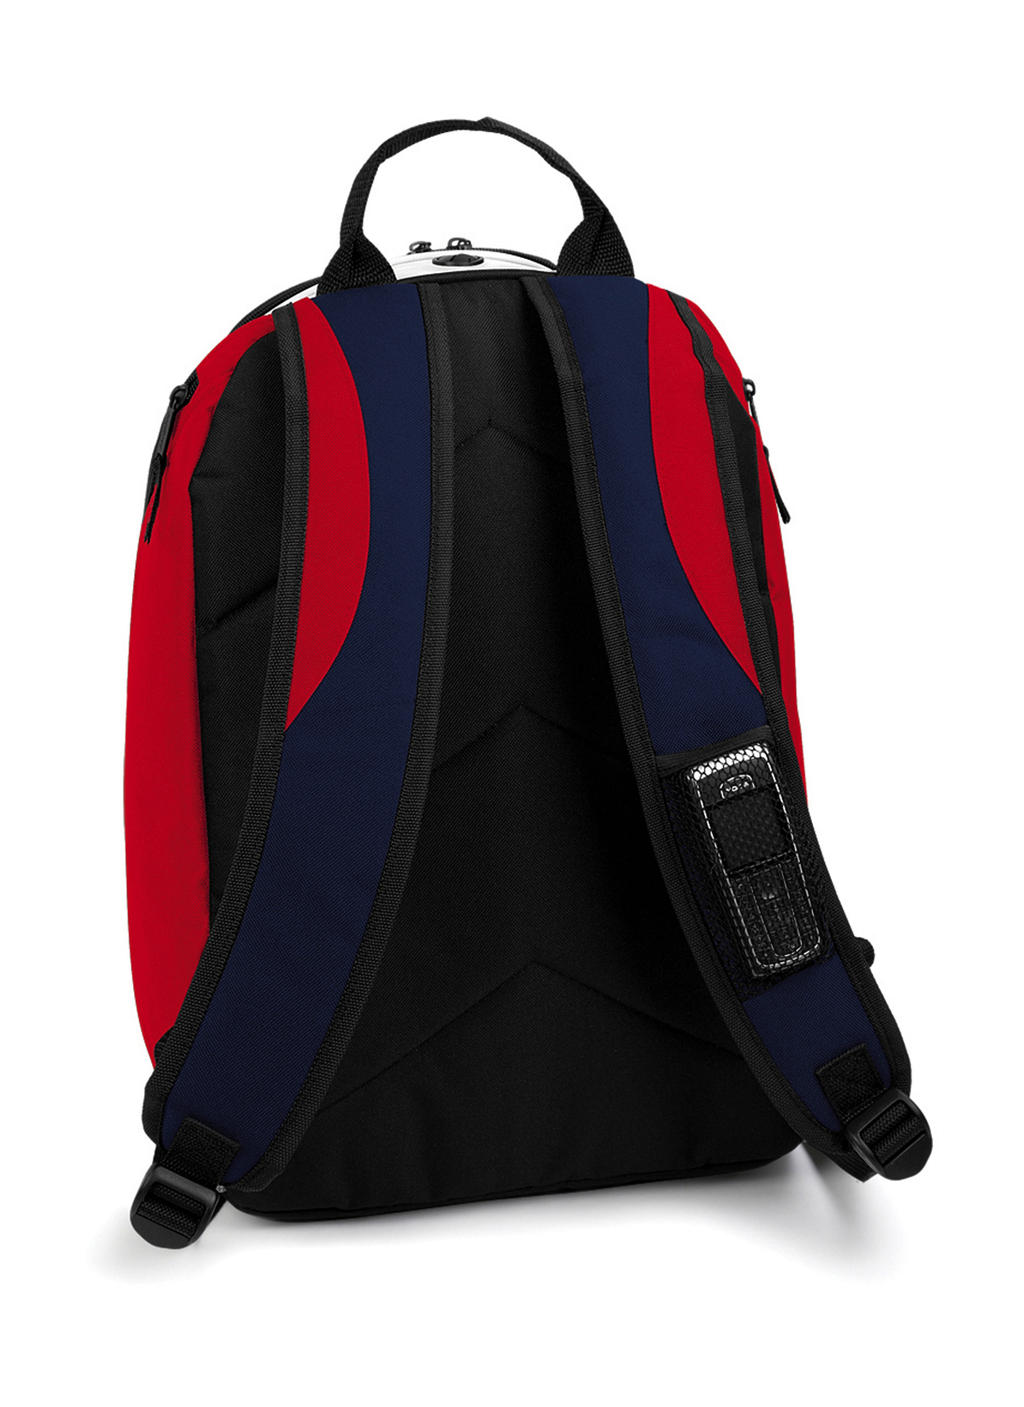  Teamwear Backpack in Farbe Black/Classic Red/White